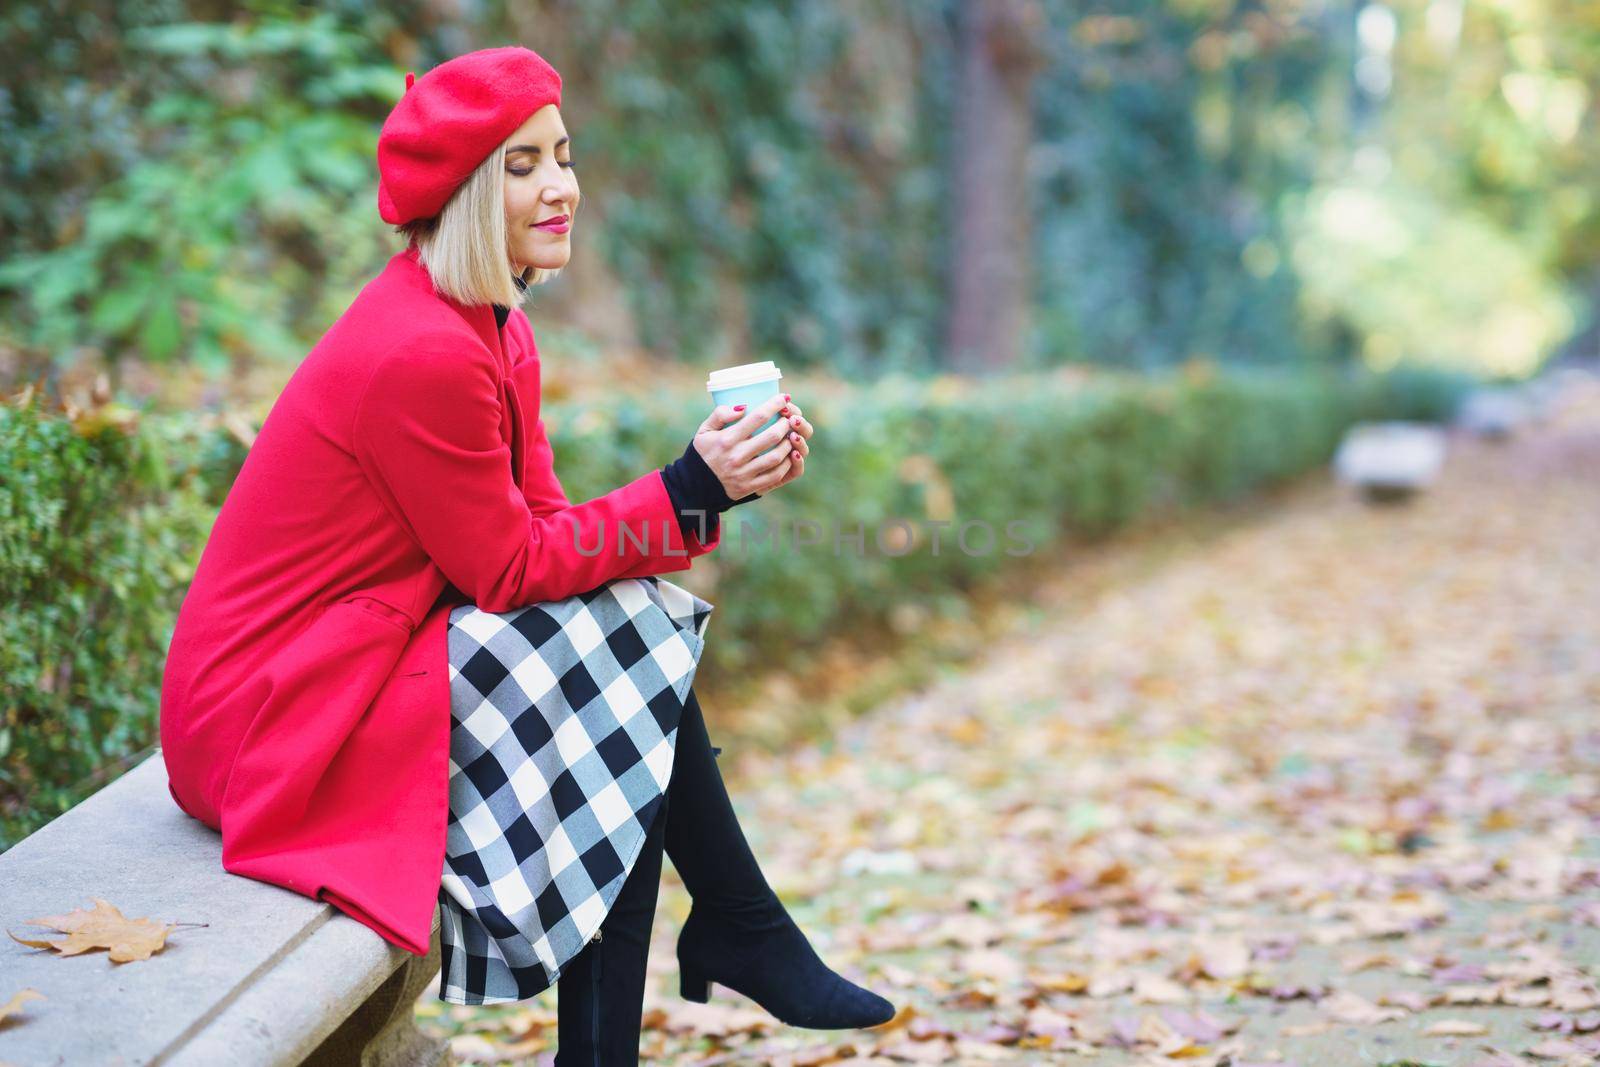 Side view of dreamy female with closed eyes wearing red beret and coat sitting on bench in park with fallen dry leaves and drinking coffee